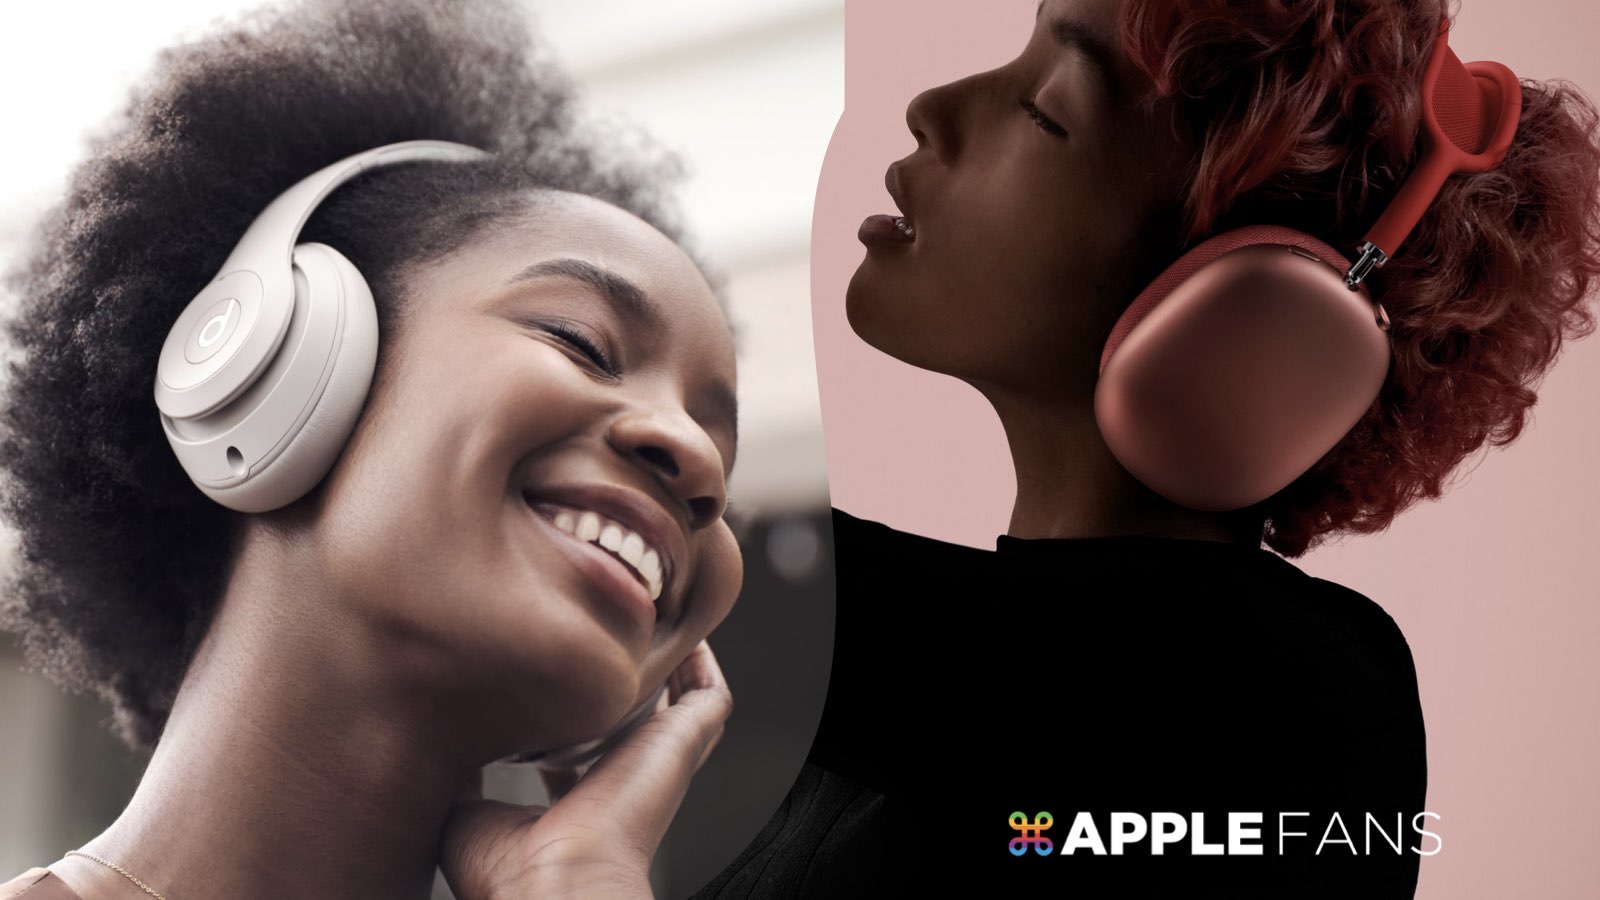 Beats Studio Pro vs. Apple AirPods Max: Which is better?